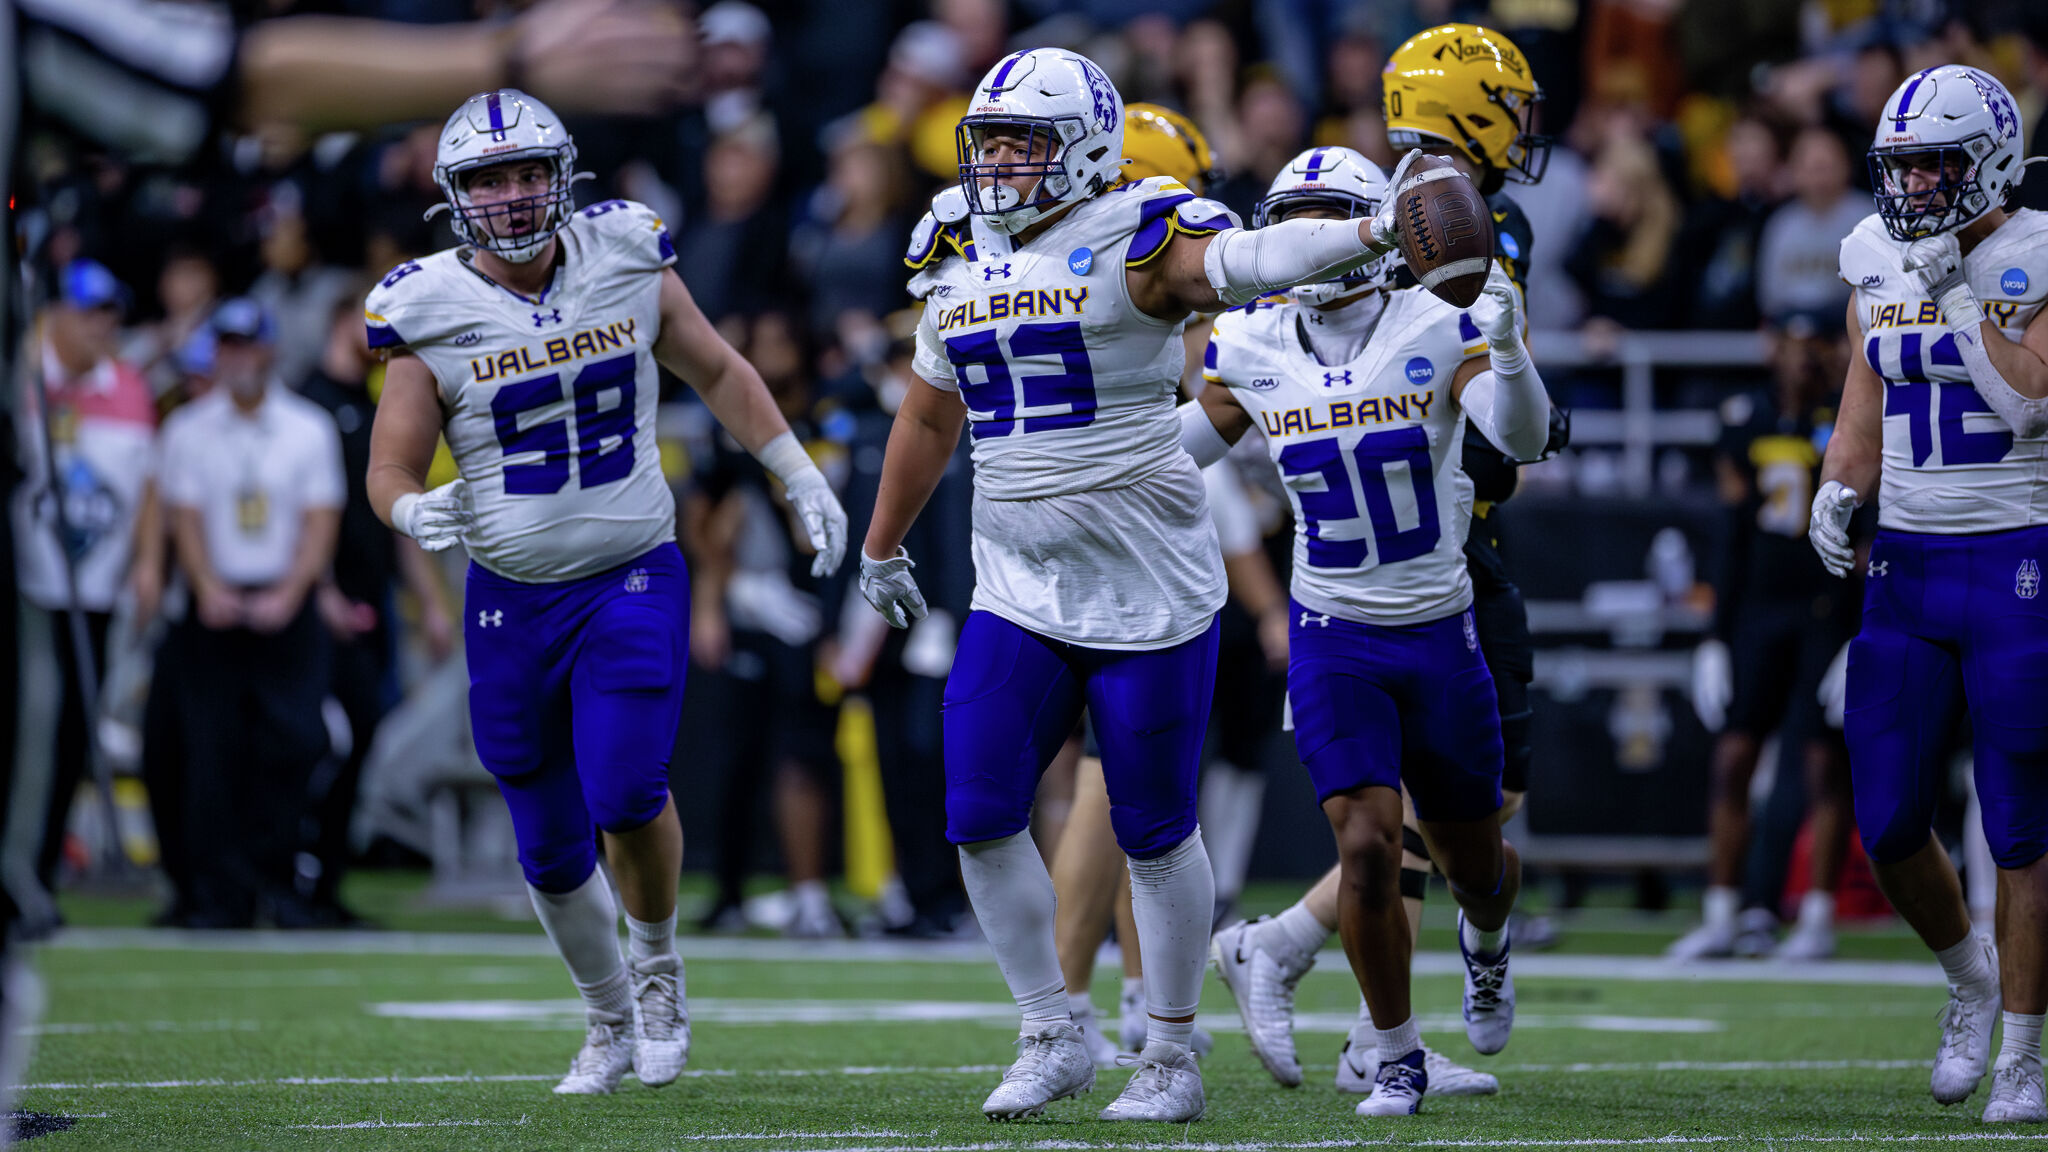 UAlbany defensive front to clash with South Dakota State…